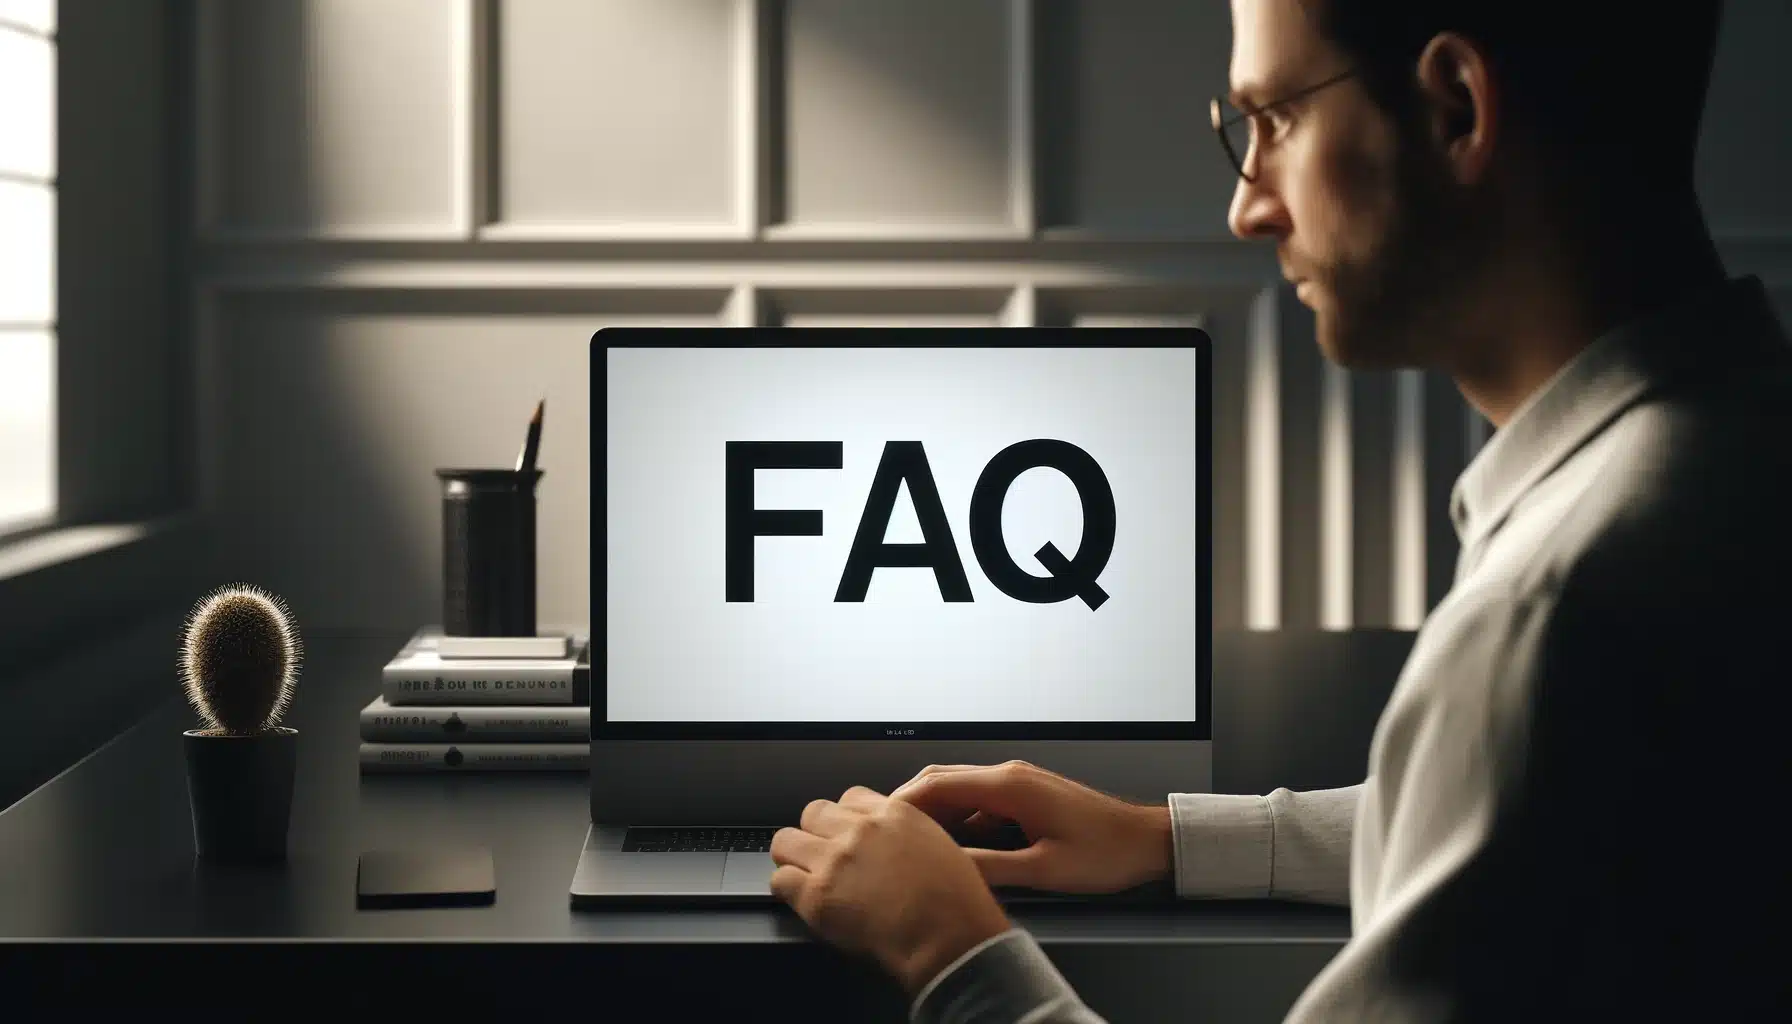 A middle-aged man working on a laptop computer displaying 'FAQ' about empyrean reinstatement techniques in a modern office.